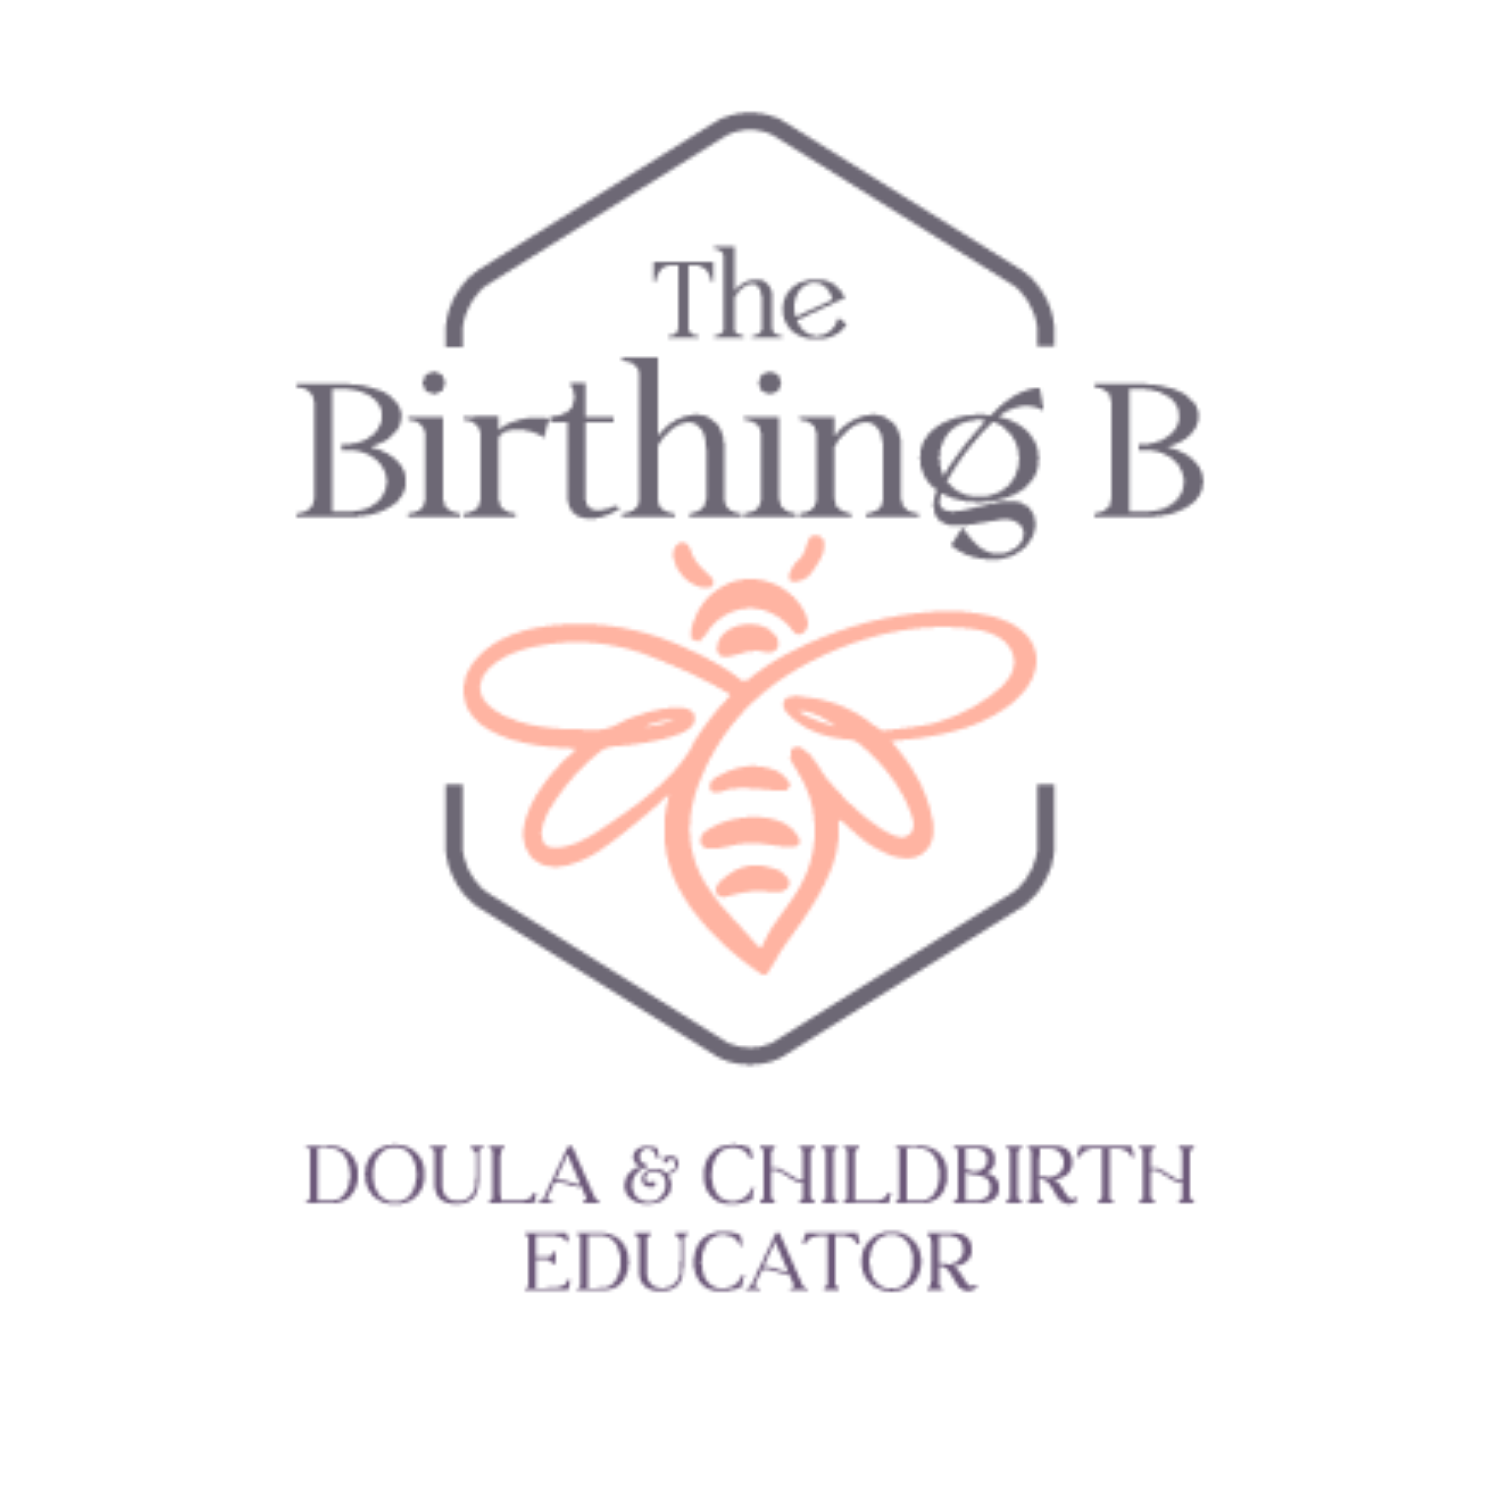 Bengkung Bellybinding, DFW Births, Dallas Doula, Fort Worth Doula